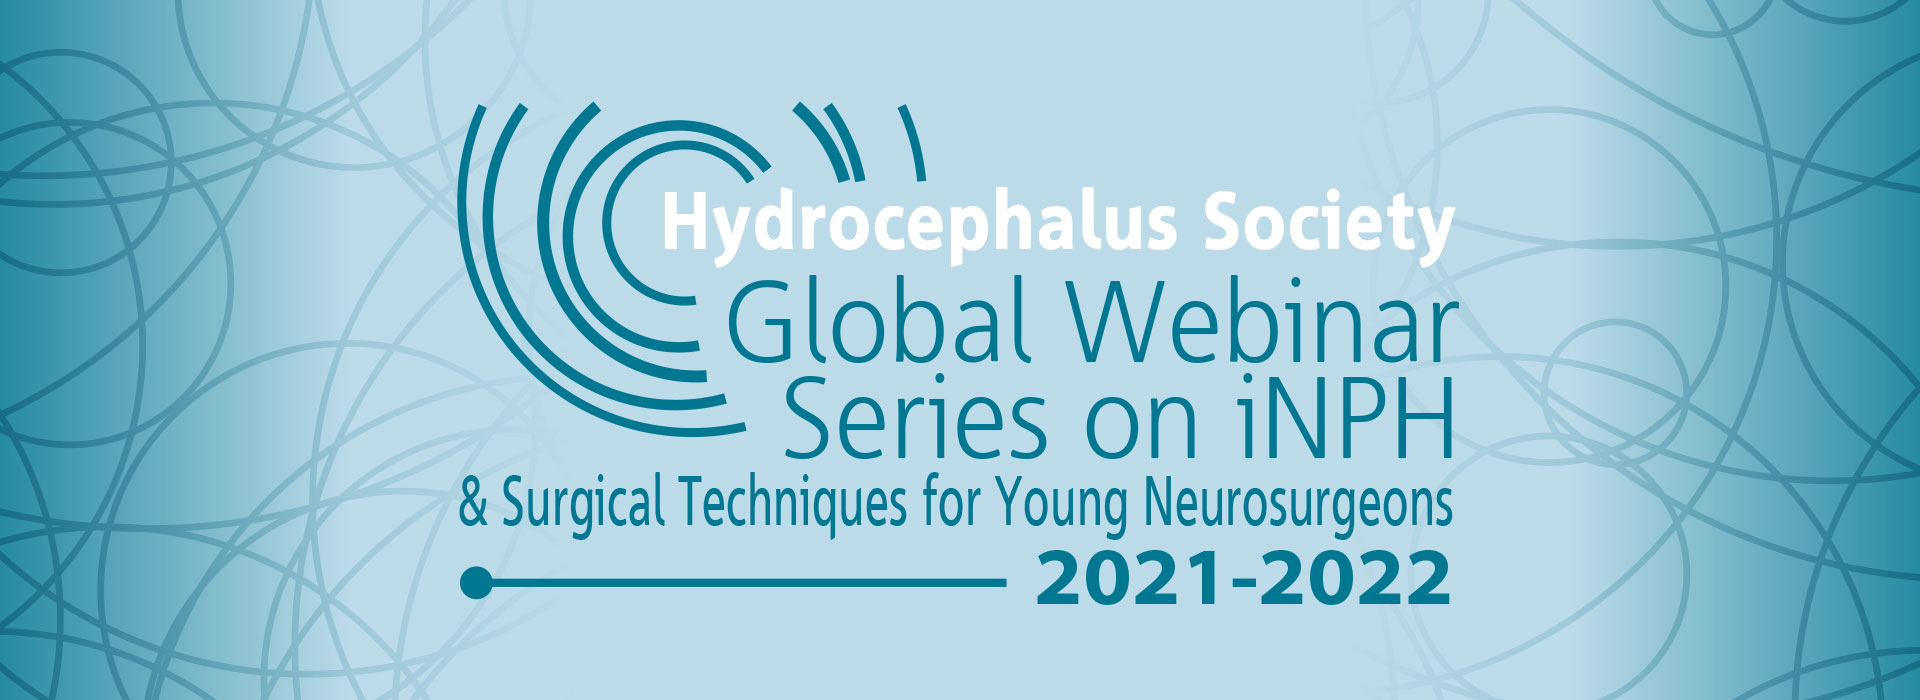 Hydrocephalus Society Global Webinar Series on iNPH:   Coming next: Part 6 – Outcome – 26 Feb 2022, 11.00 AM CET